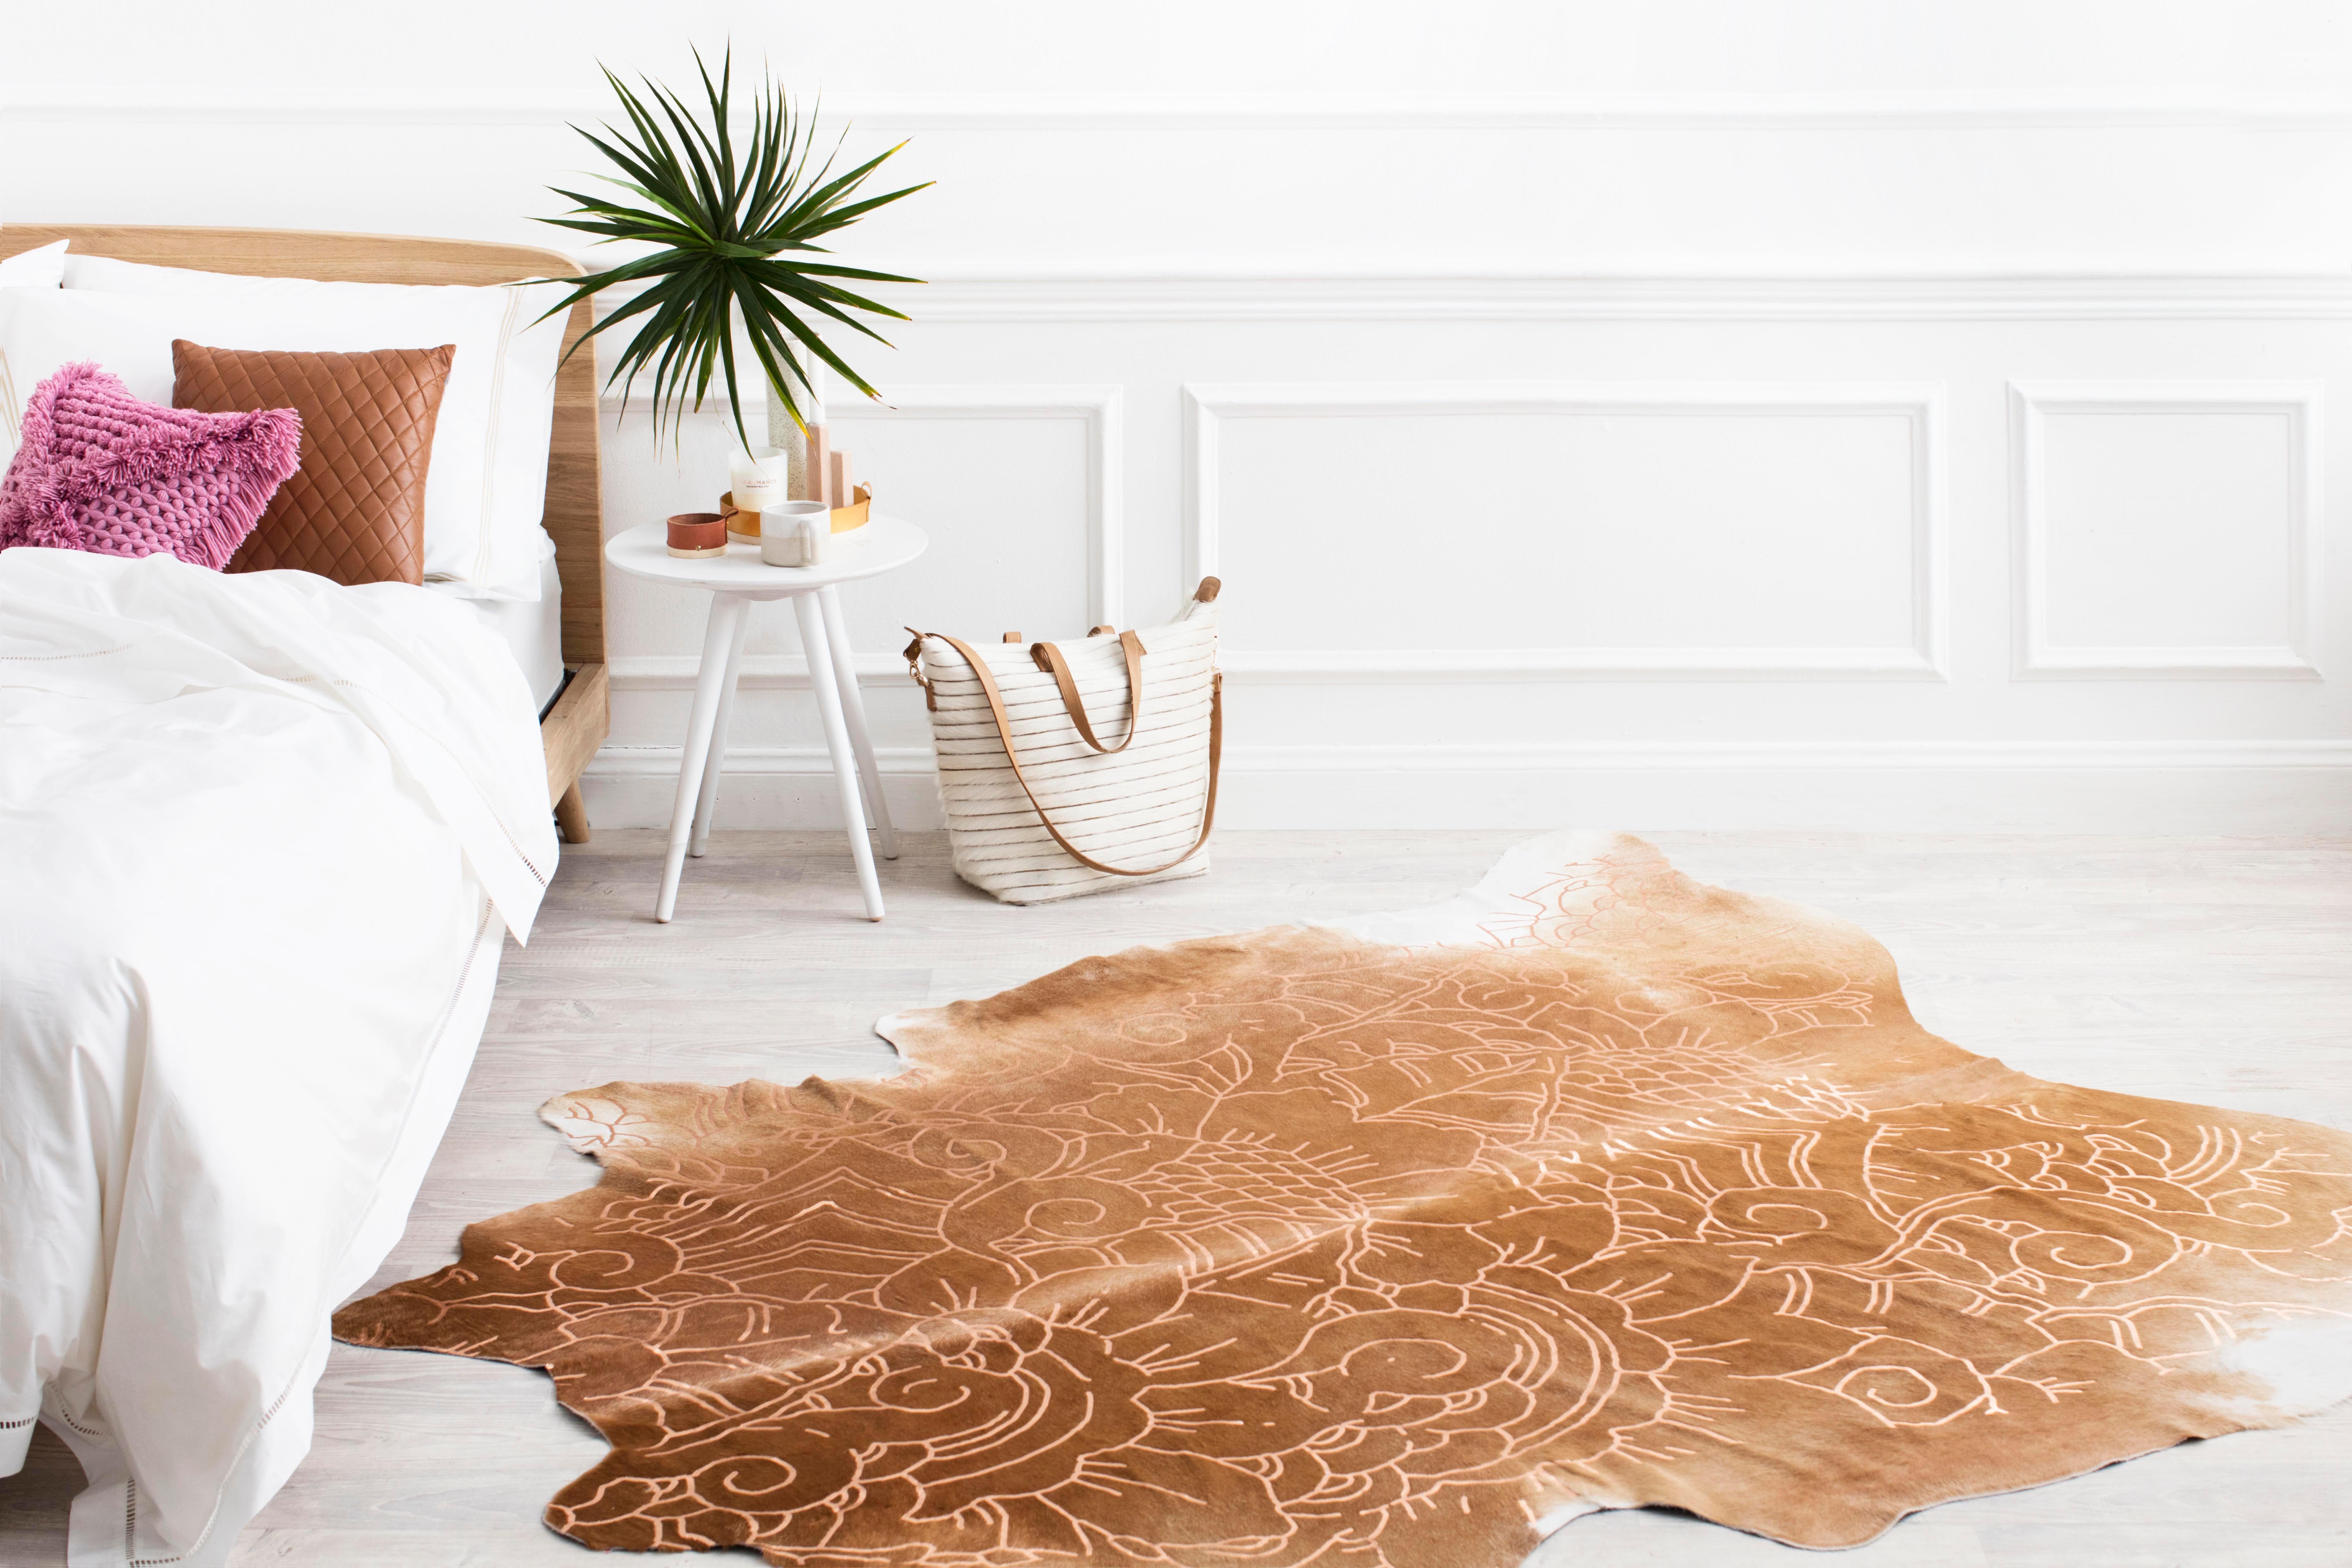 A stunning alchemy of natural hide combined with ethnic vibes and high impact metallics. This whimsical, boho style is the supreme ultimate in laid-back luxe.

The Isola hide is a design collaboration with our sister brand, Amigos de Hoy. Premium